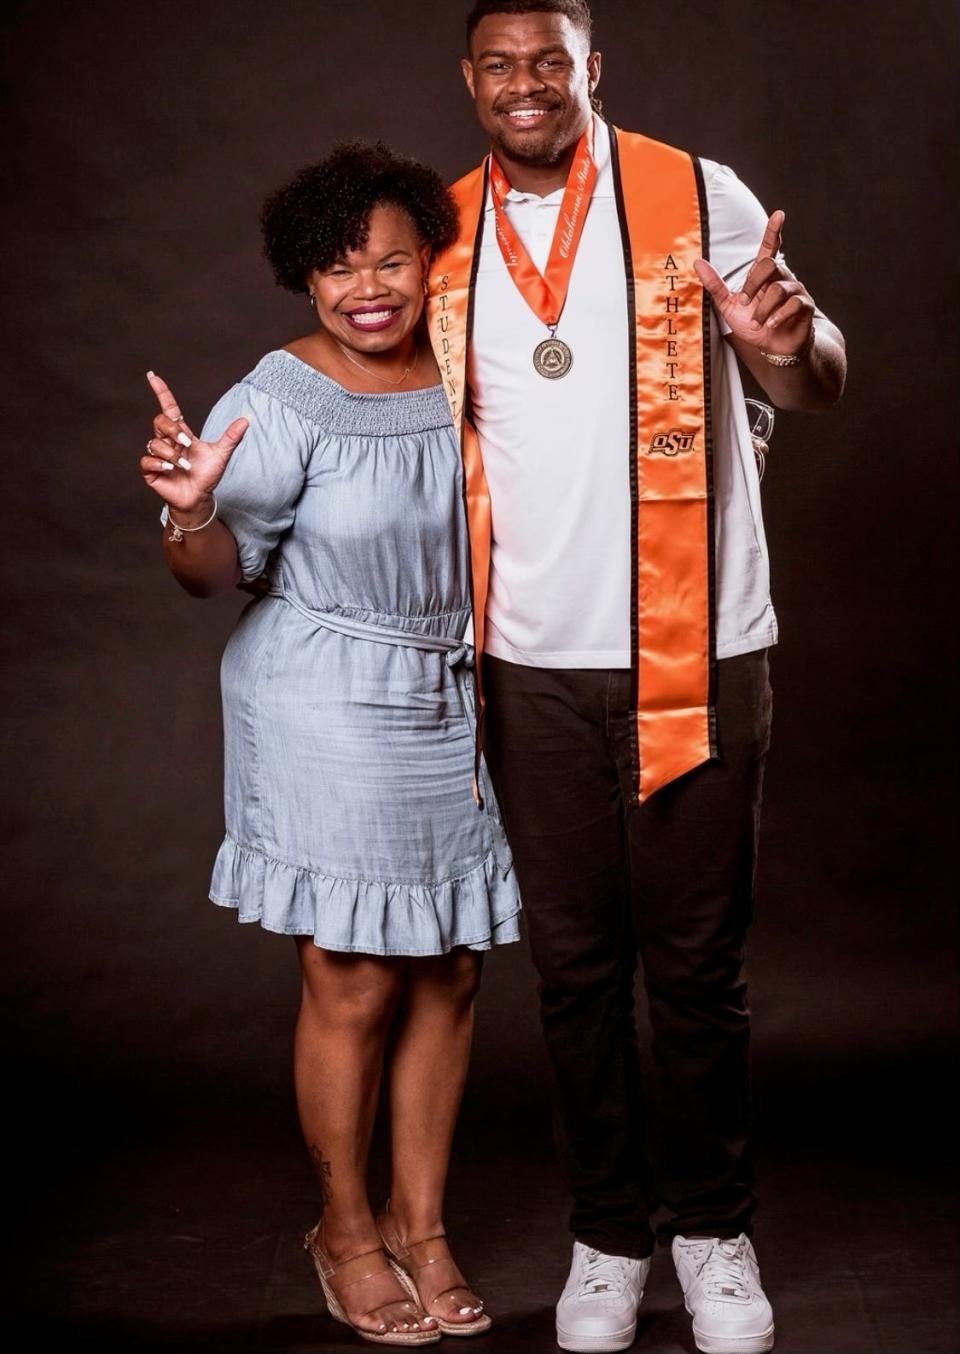 Jacksonville Jaguars defensive tackle Tyler Lacy with mother Veronica celebrate his graduation from Oklahoma State.